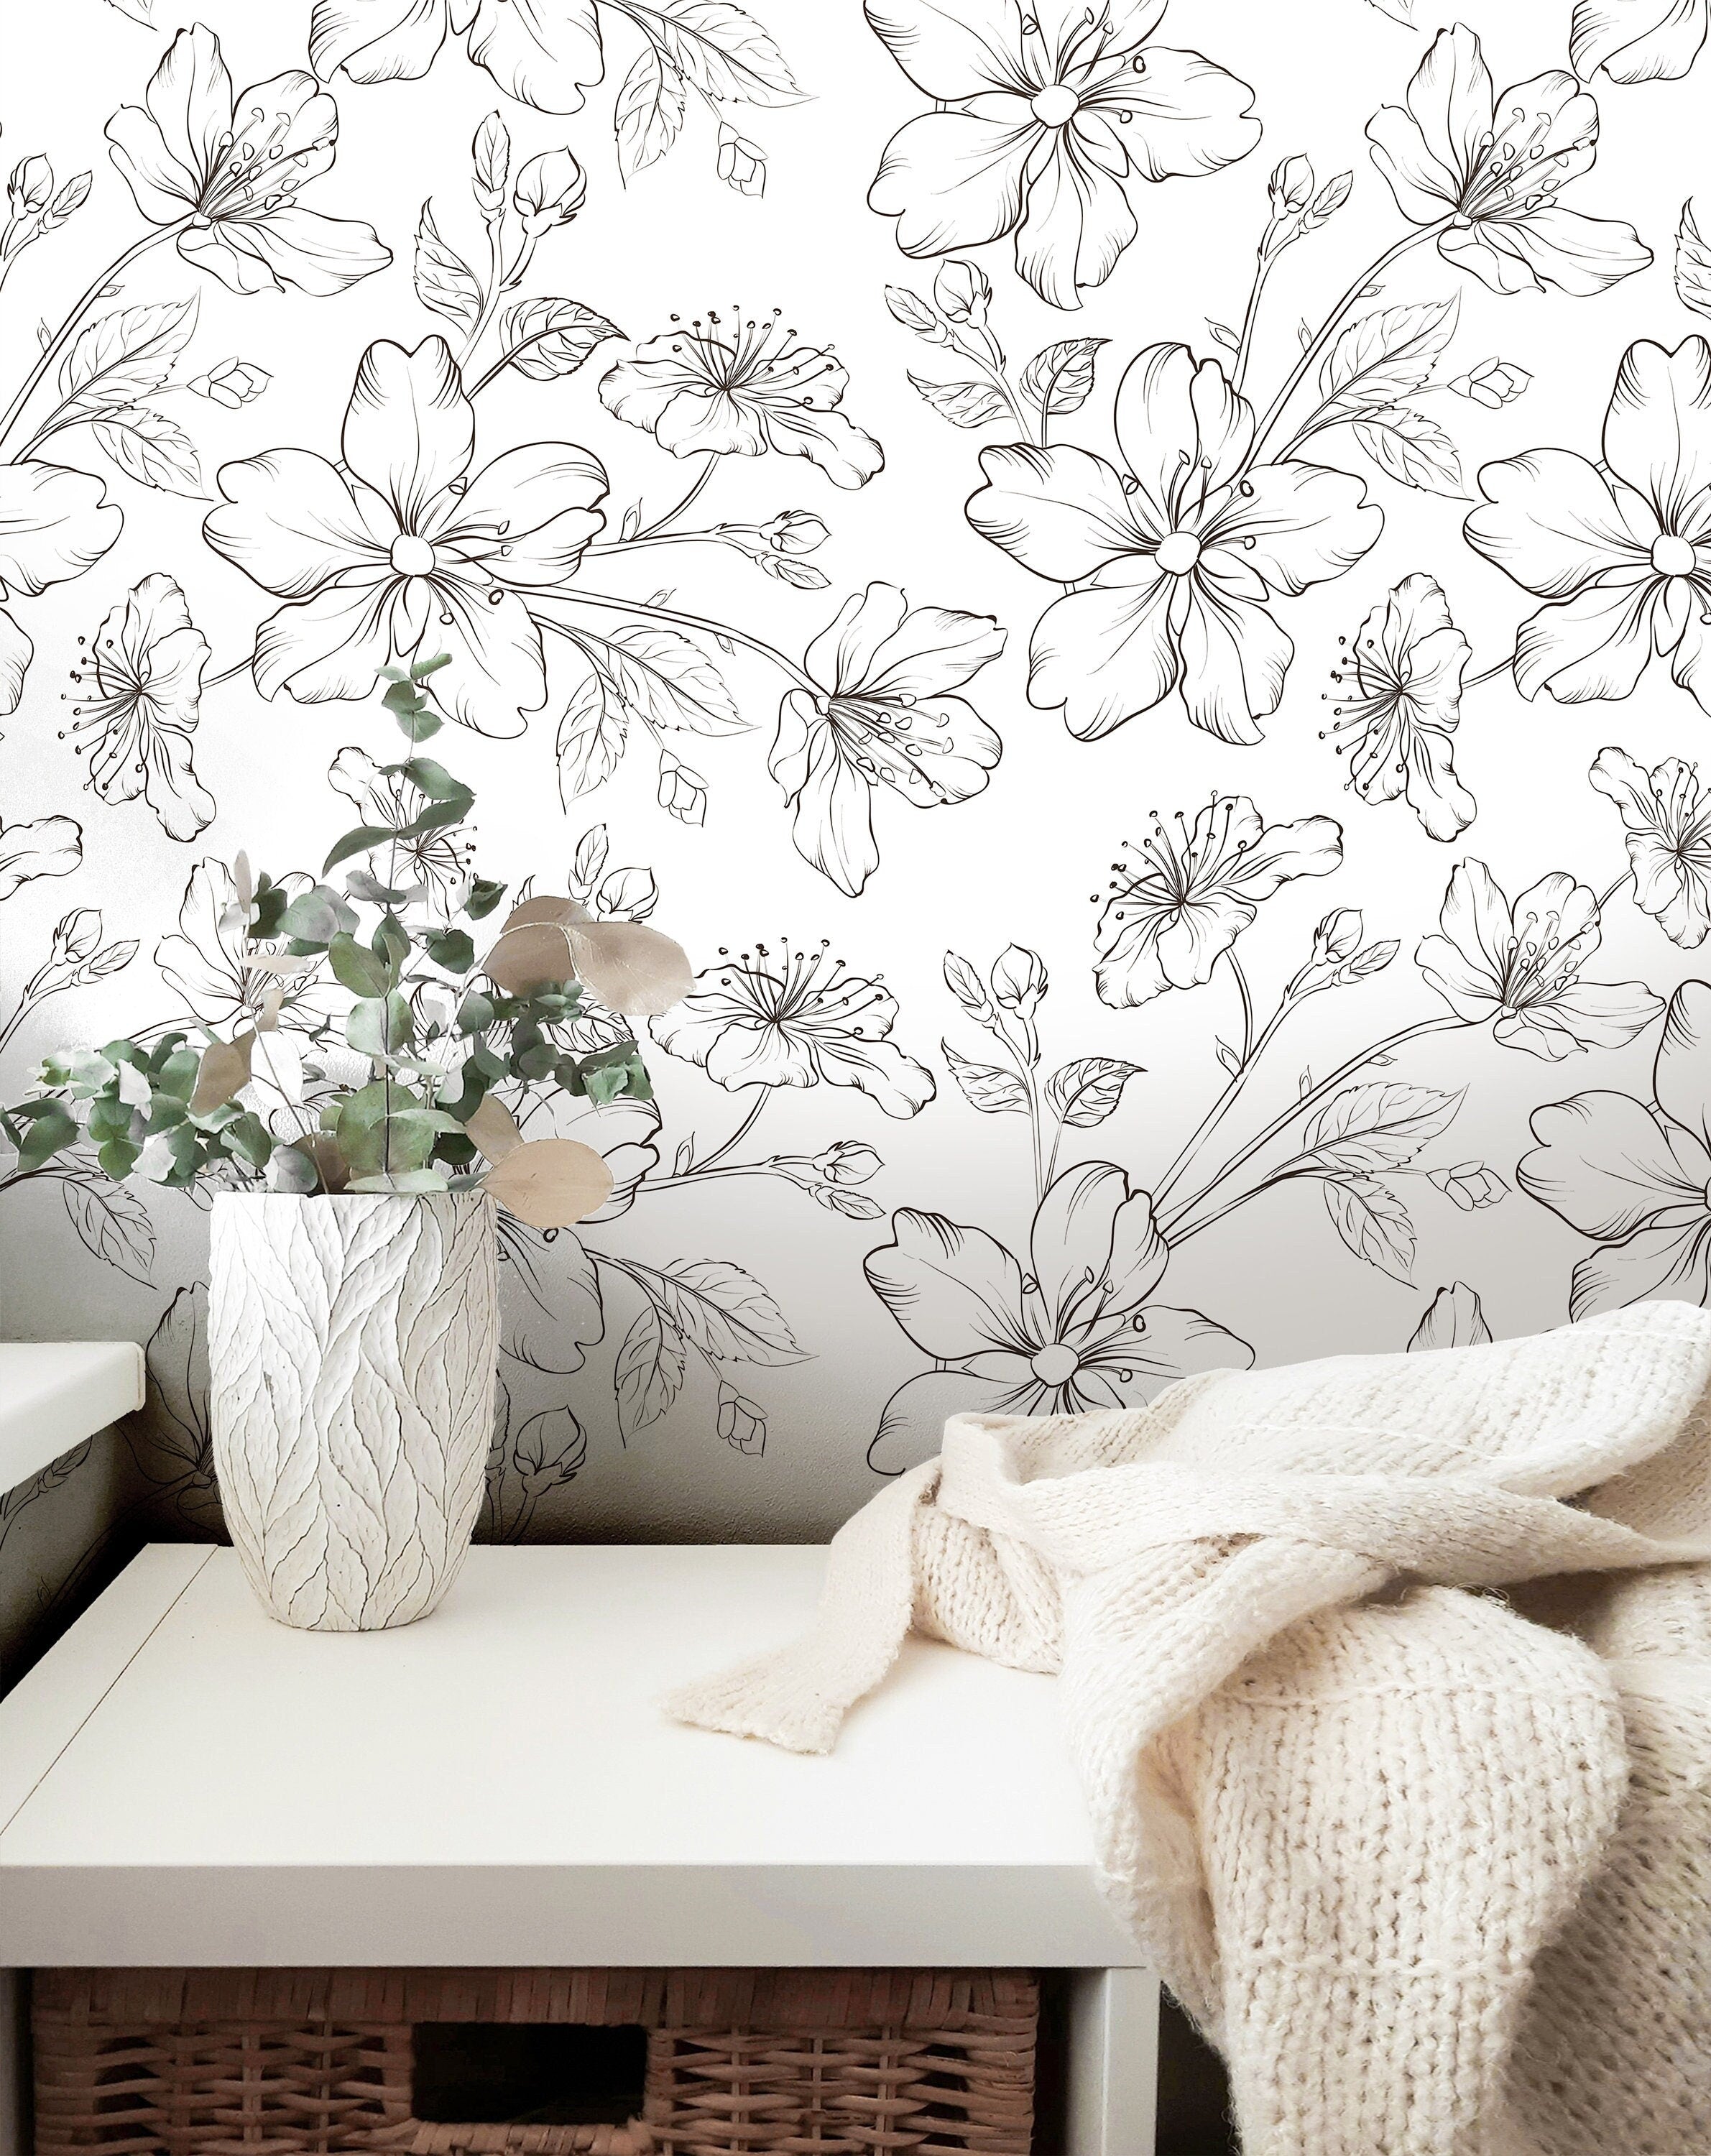 Wallpaper Peel and Stick Wallpaper Large Outline Floral Neutral White Removable Wallpaper Wall Decor Home Decor Wall Art Room Decor 3812 - JamesAndColors